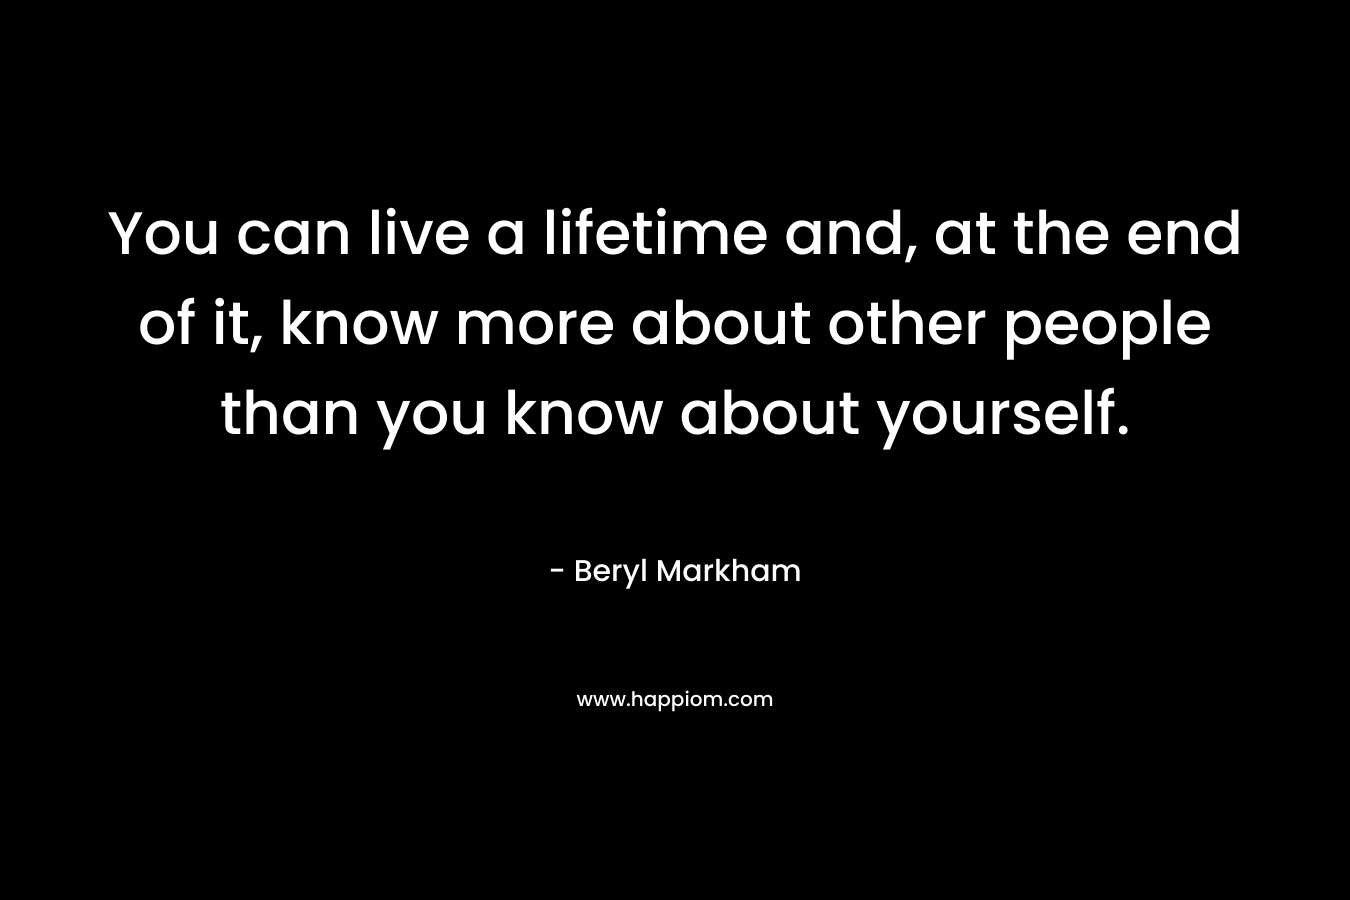 You can live a lifetime and, at the end of it, know more about other people than you know about yourself. – Beryl Markham